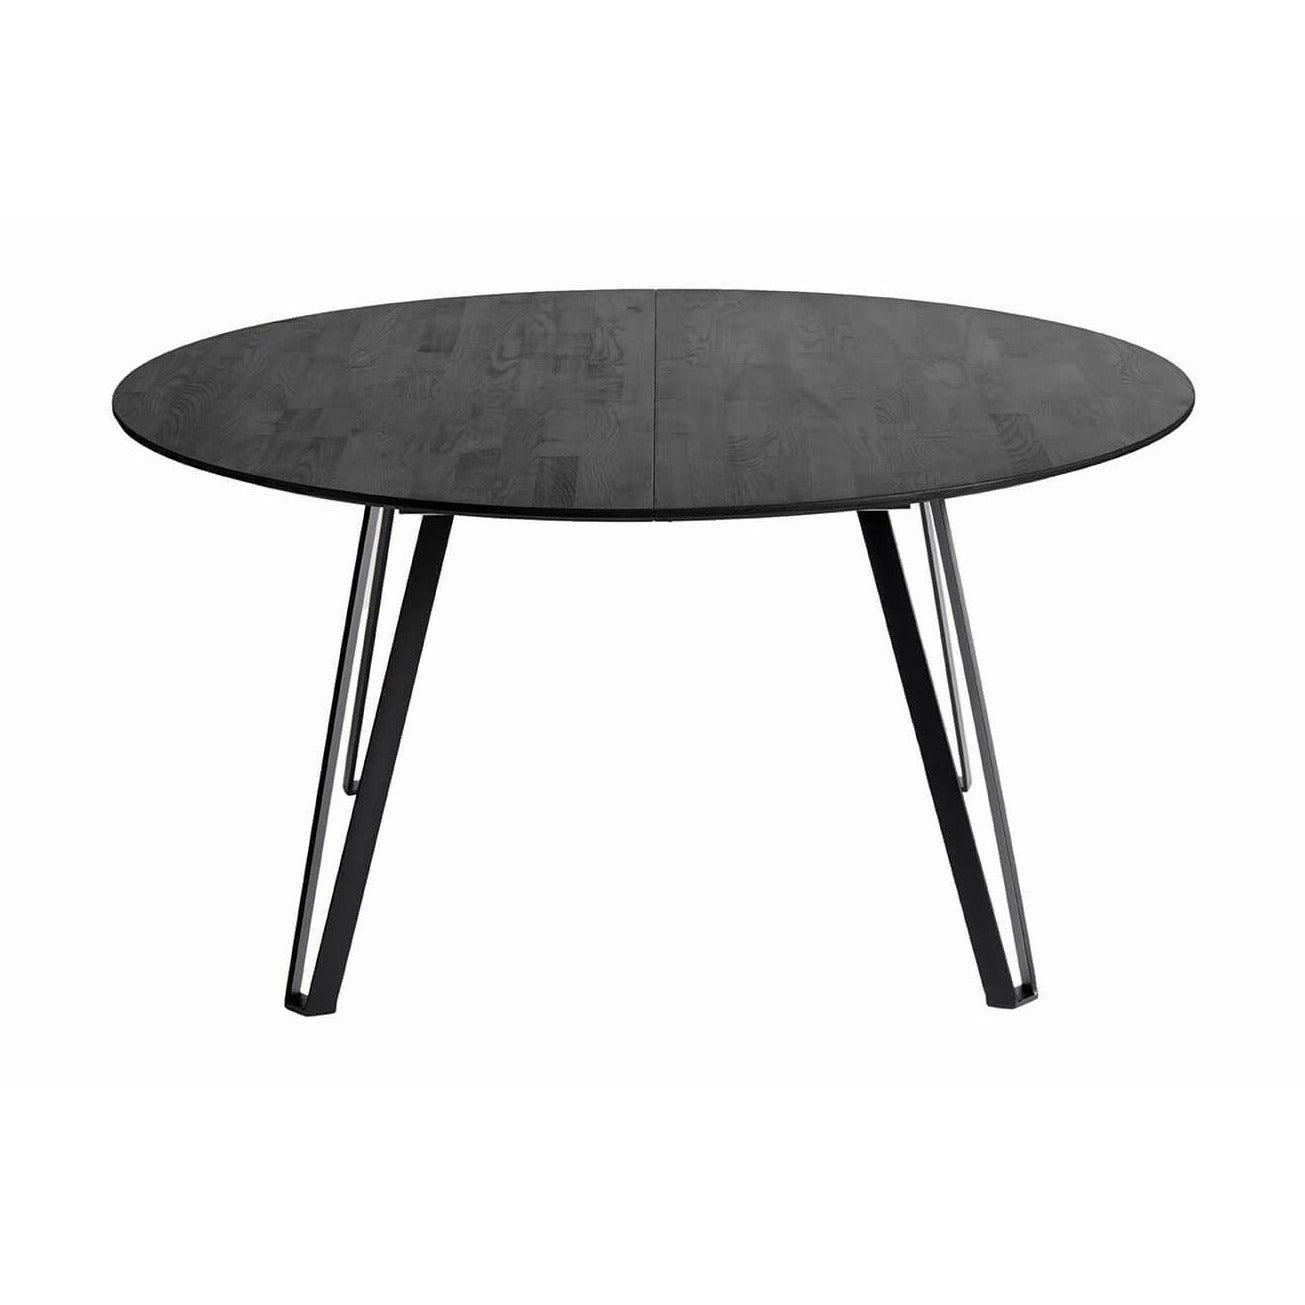 Muubs Space Dining Table Black, Ø150 cm